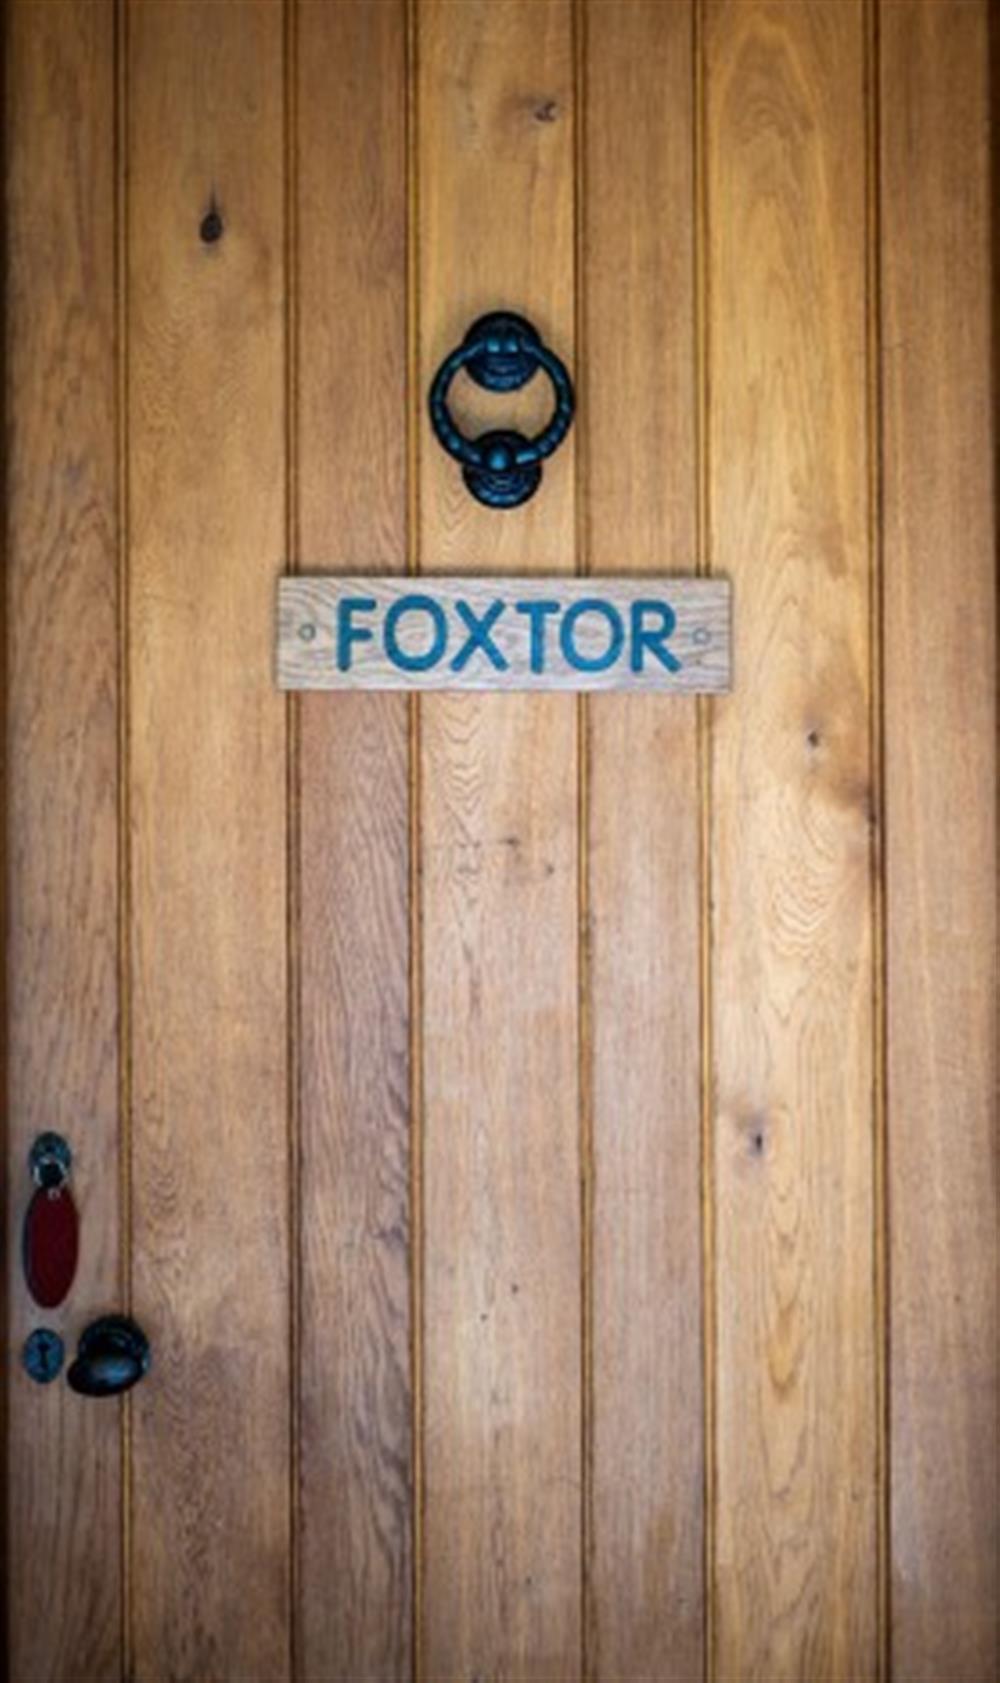 Welcome to Fox Tor at Fox Tor in Chagford